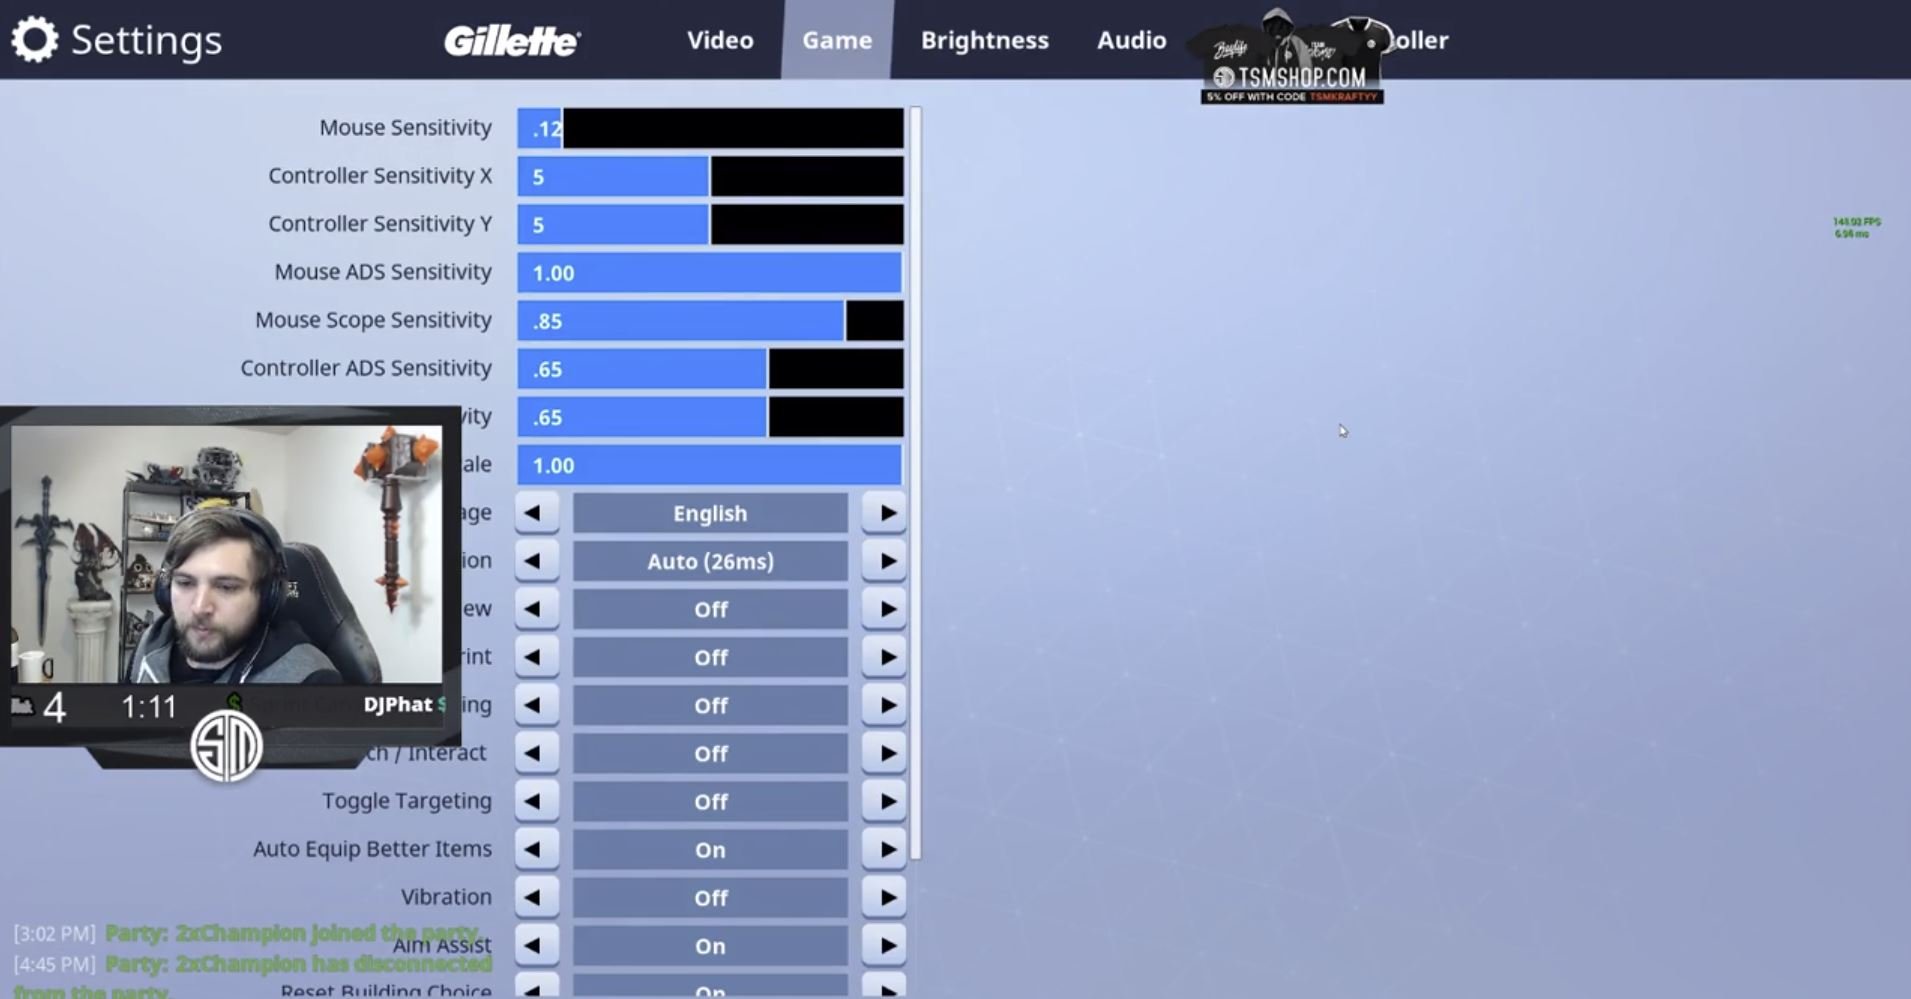 mouse settings gallery - overwatch fortnite sensitivity